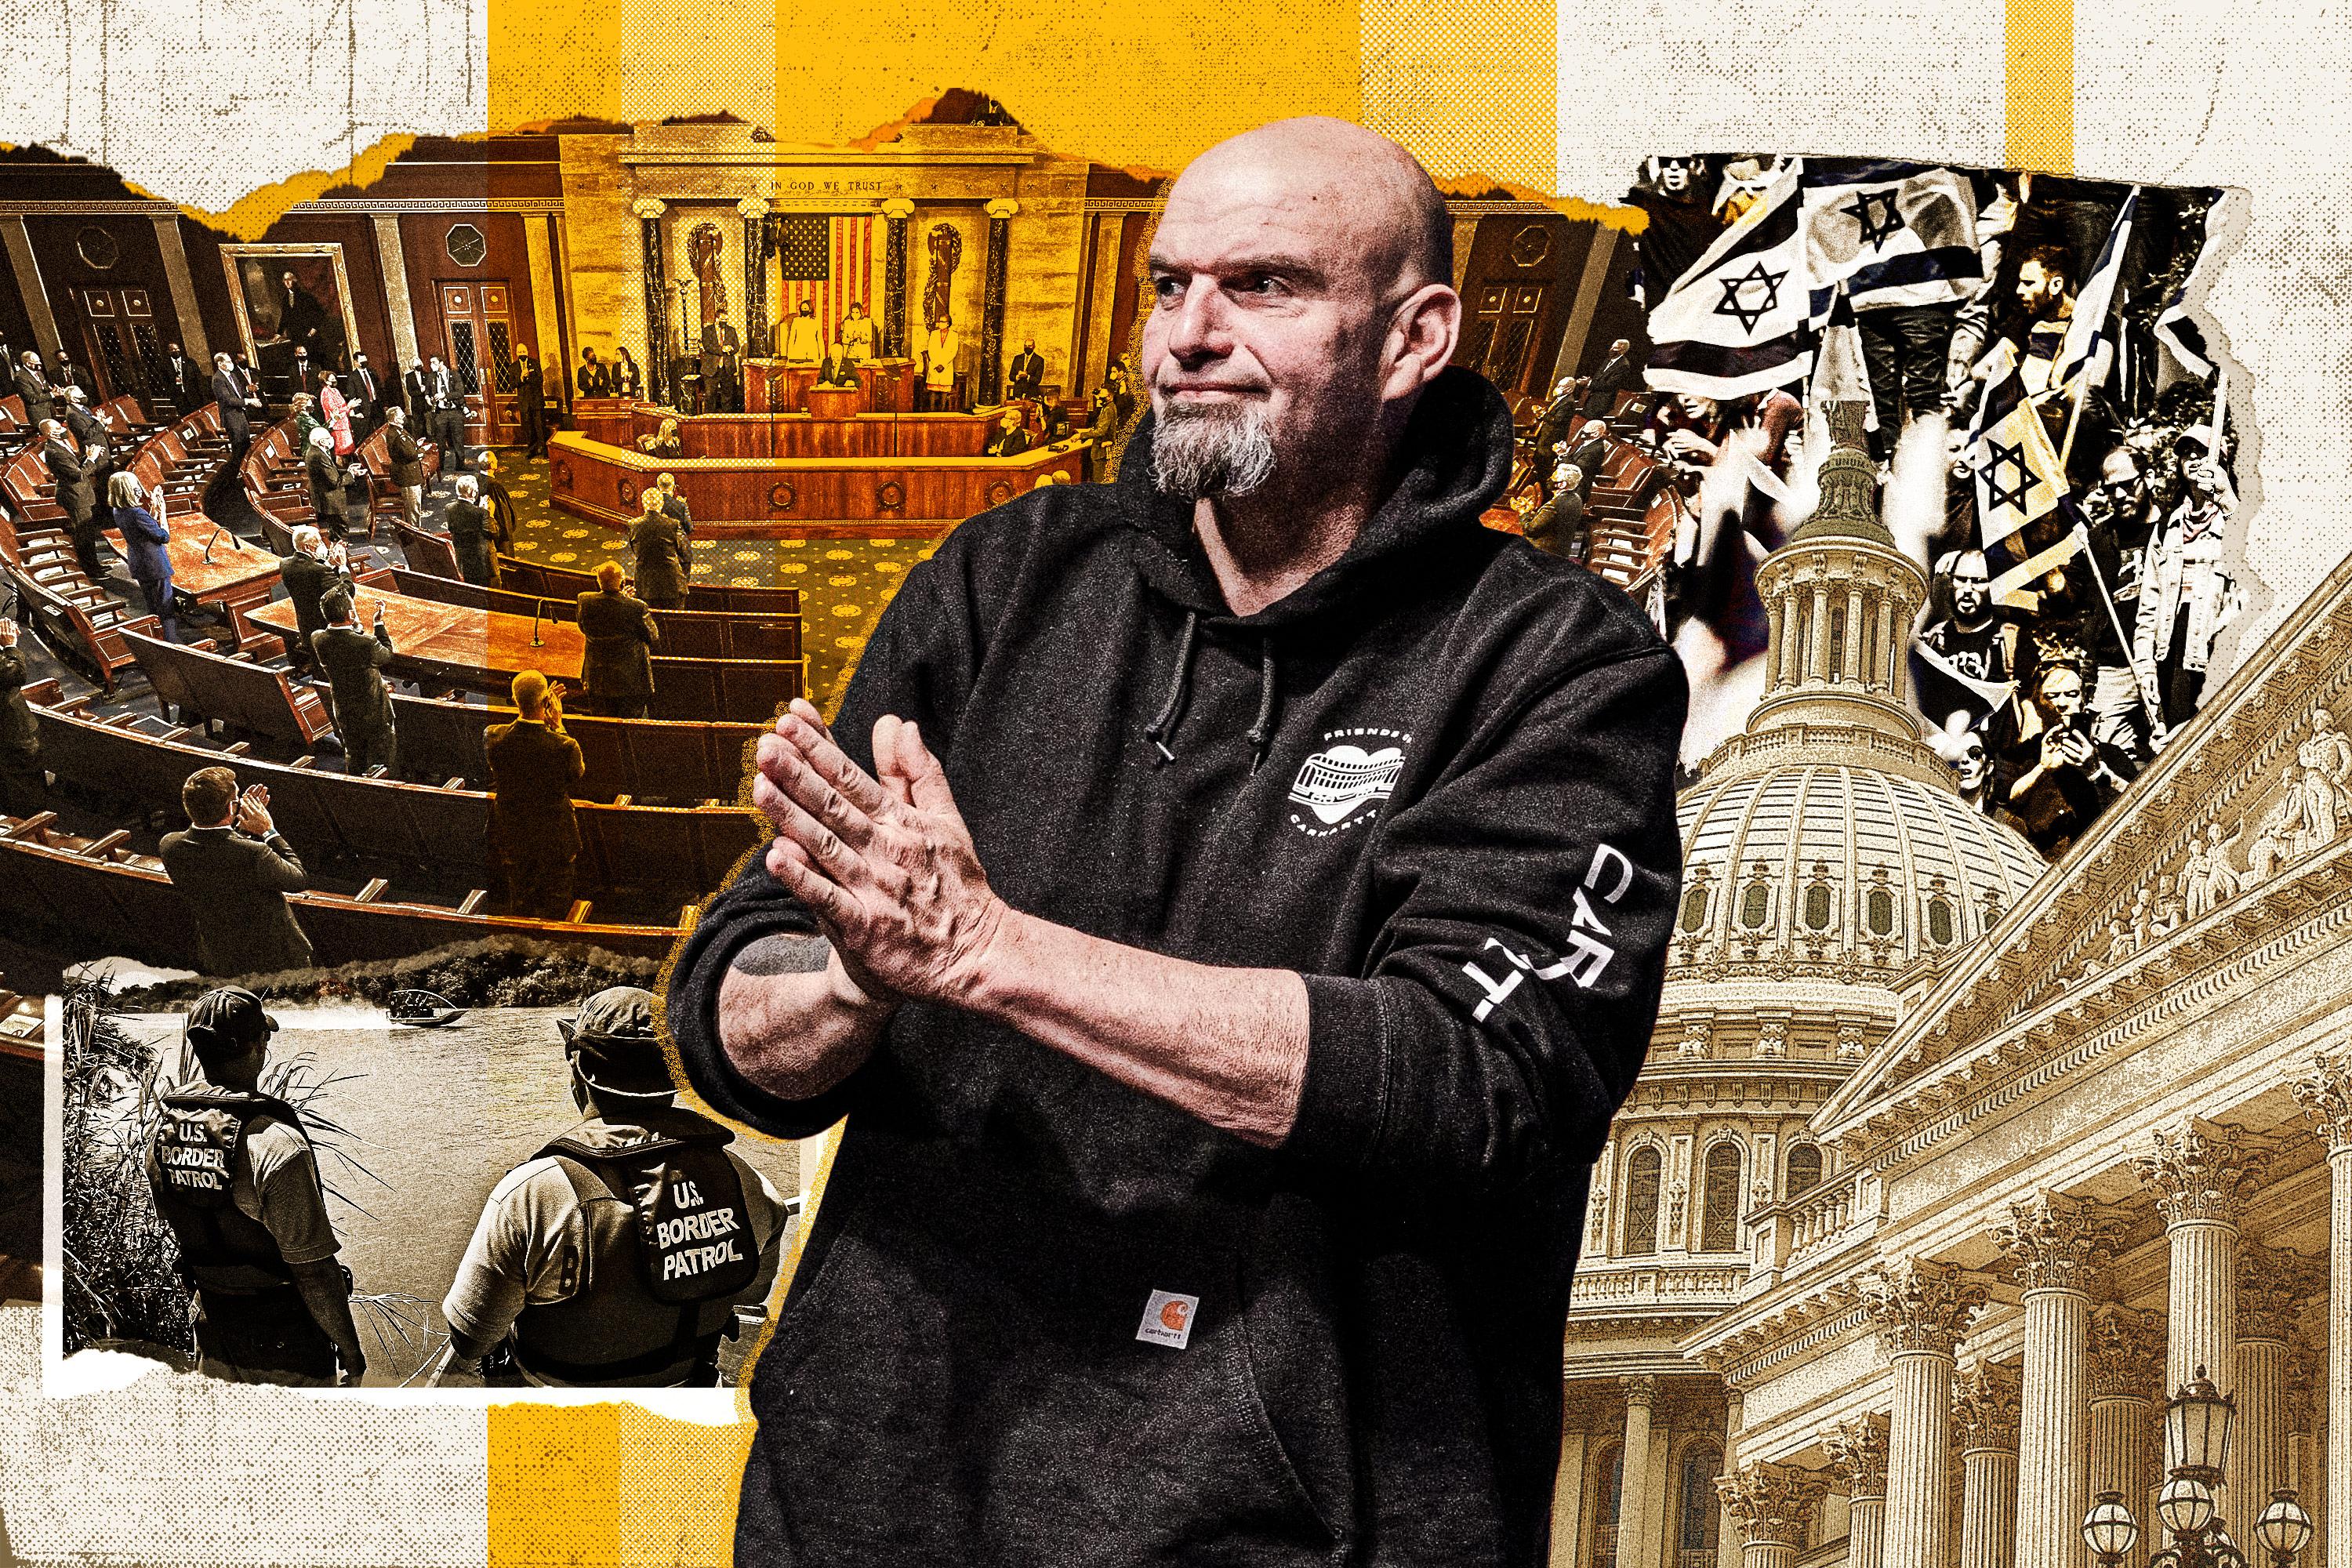 John Fetterman Is Not the Progressive Politician Everyone Thought He Was